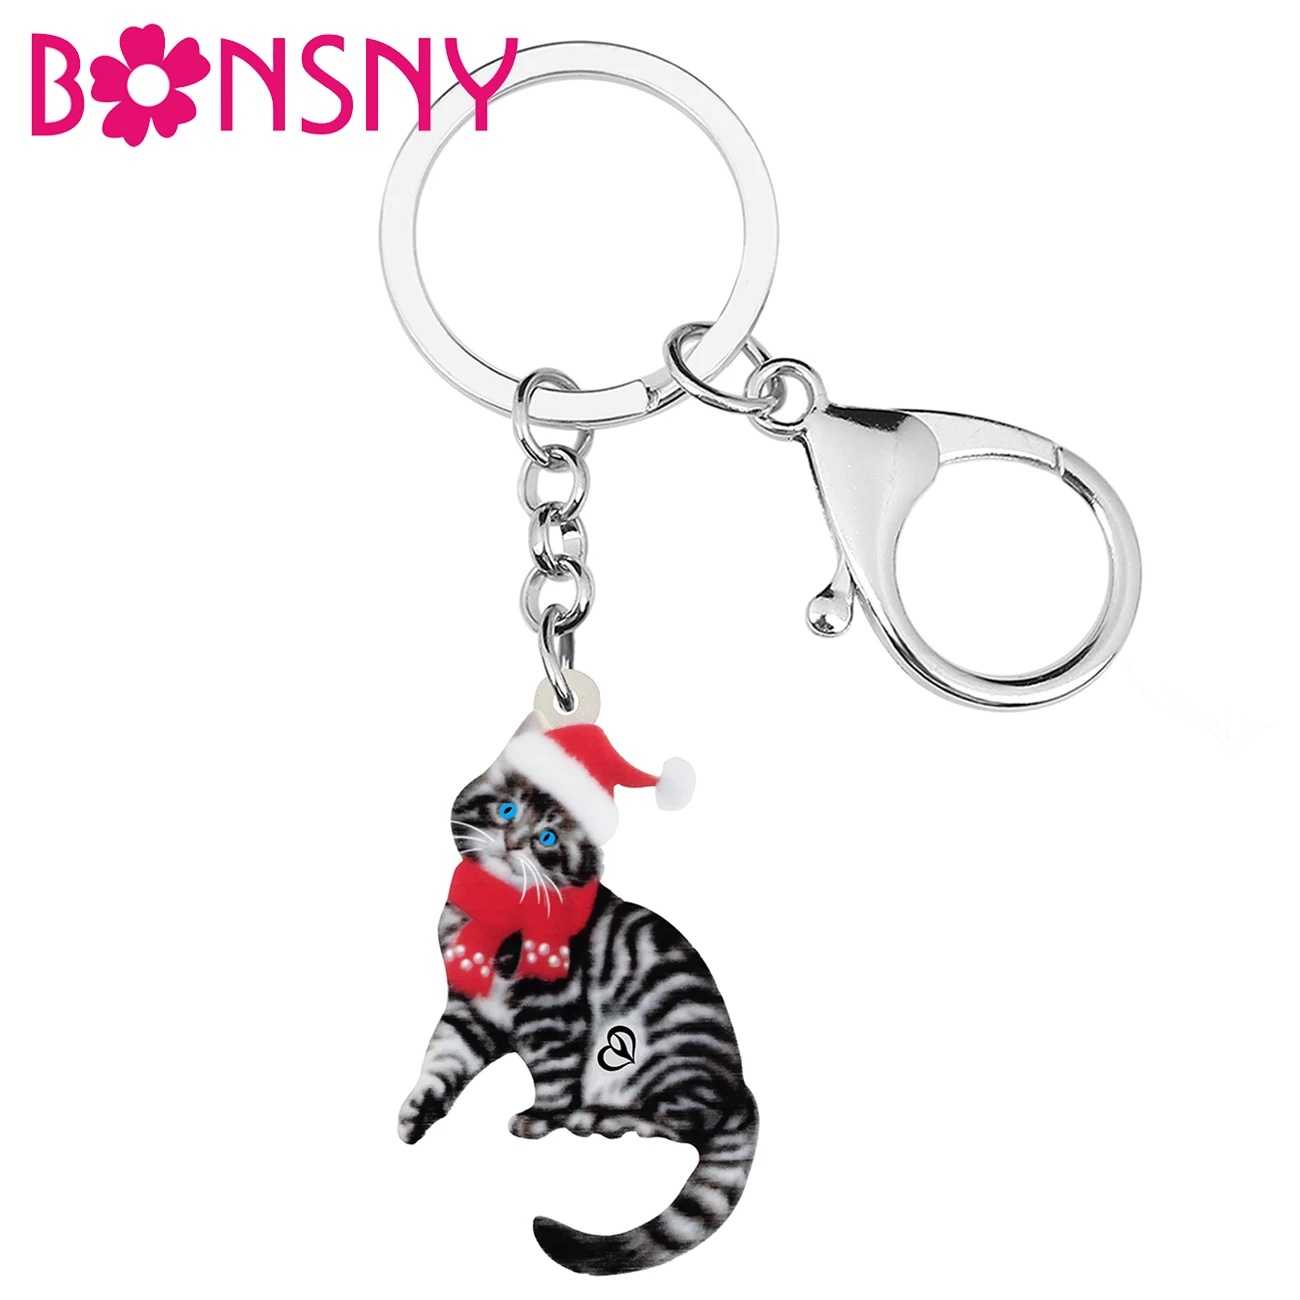 

BONSNY Acrylic Christmas Red Hat Sweet Cat Kitten Keychain Trendy Pets Key Chain Ring Charm Gifts Jewelry For Women Girls Teens